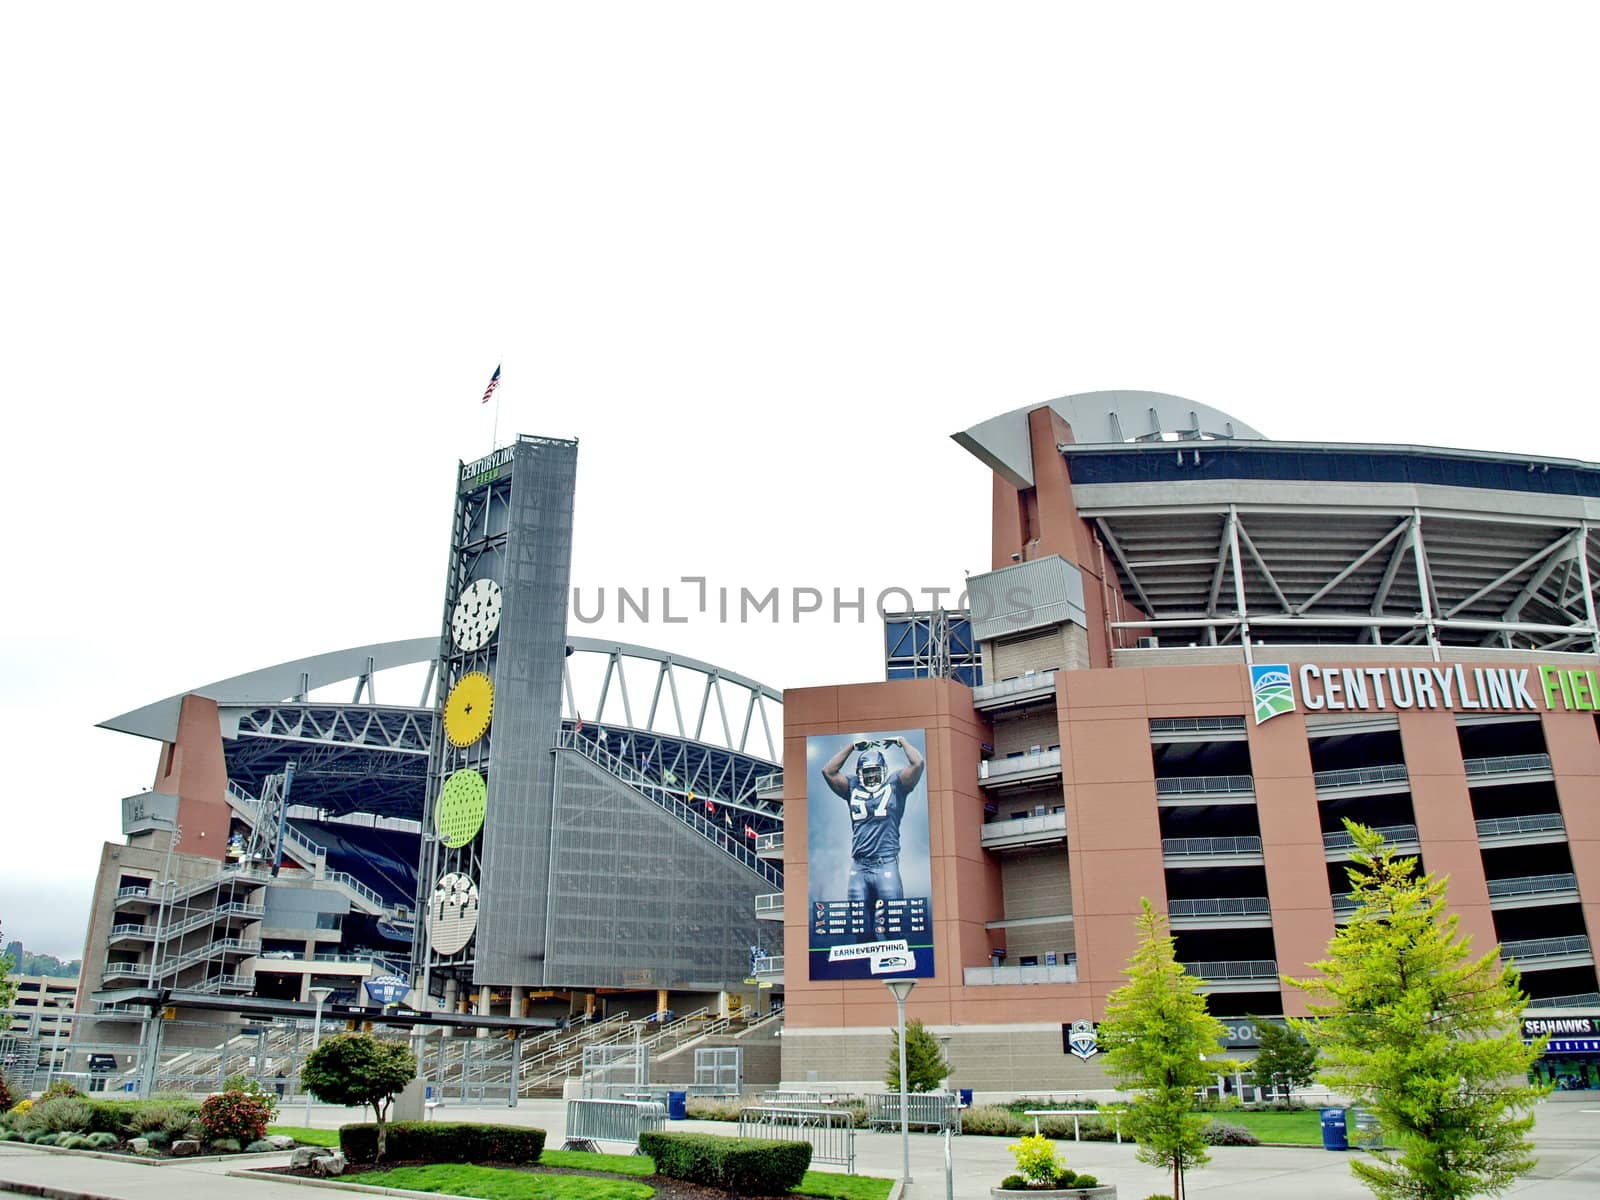 SEATTLE - OCTOBER 06: Century Link Field stadium. Home of Seattle Seahawks and Seattle Sounders on October 06, 2011 in Seattle, Washington.